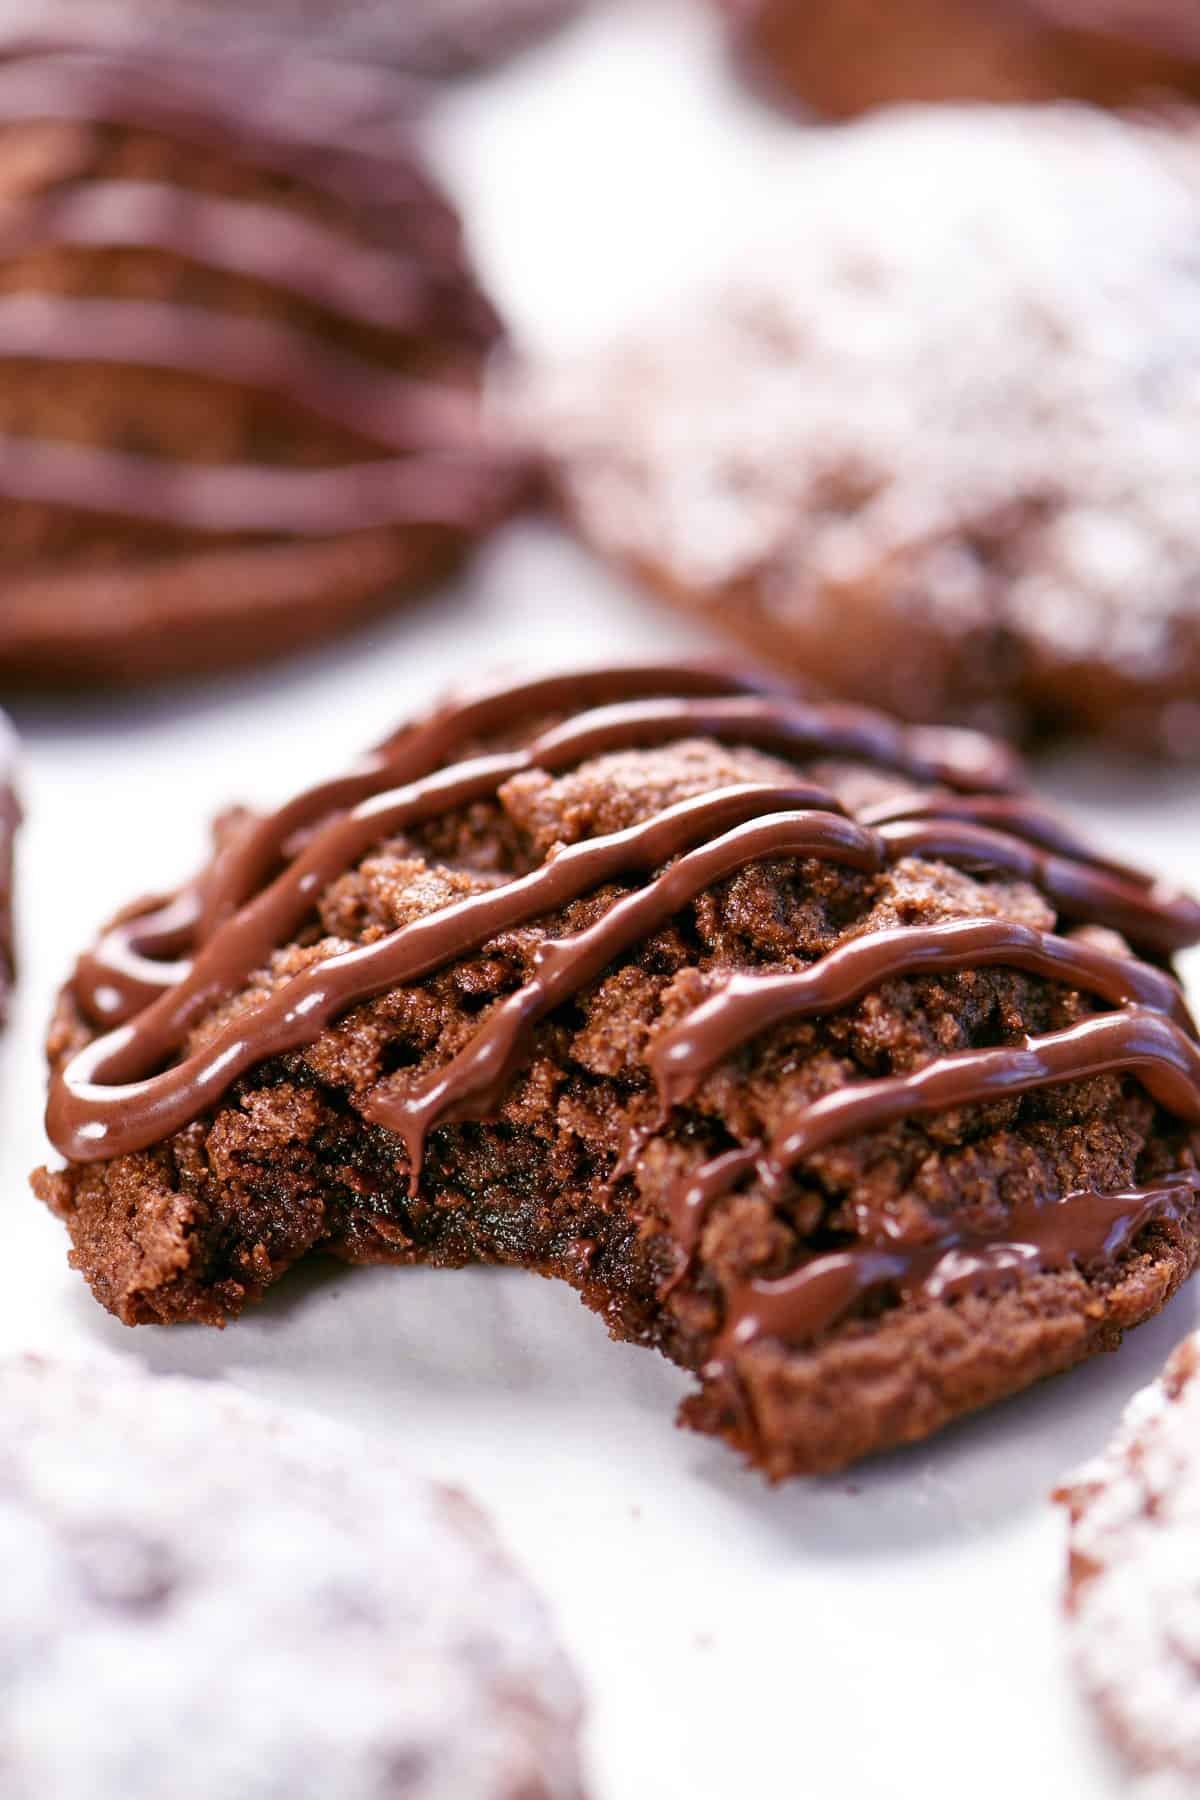 Triple chocolate cookies with a bite removed.